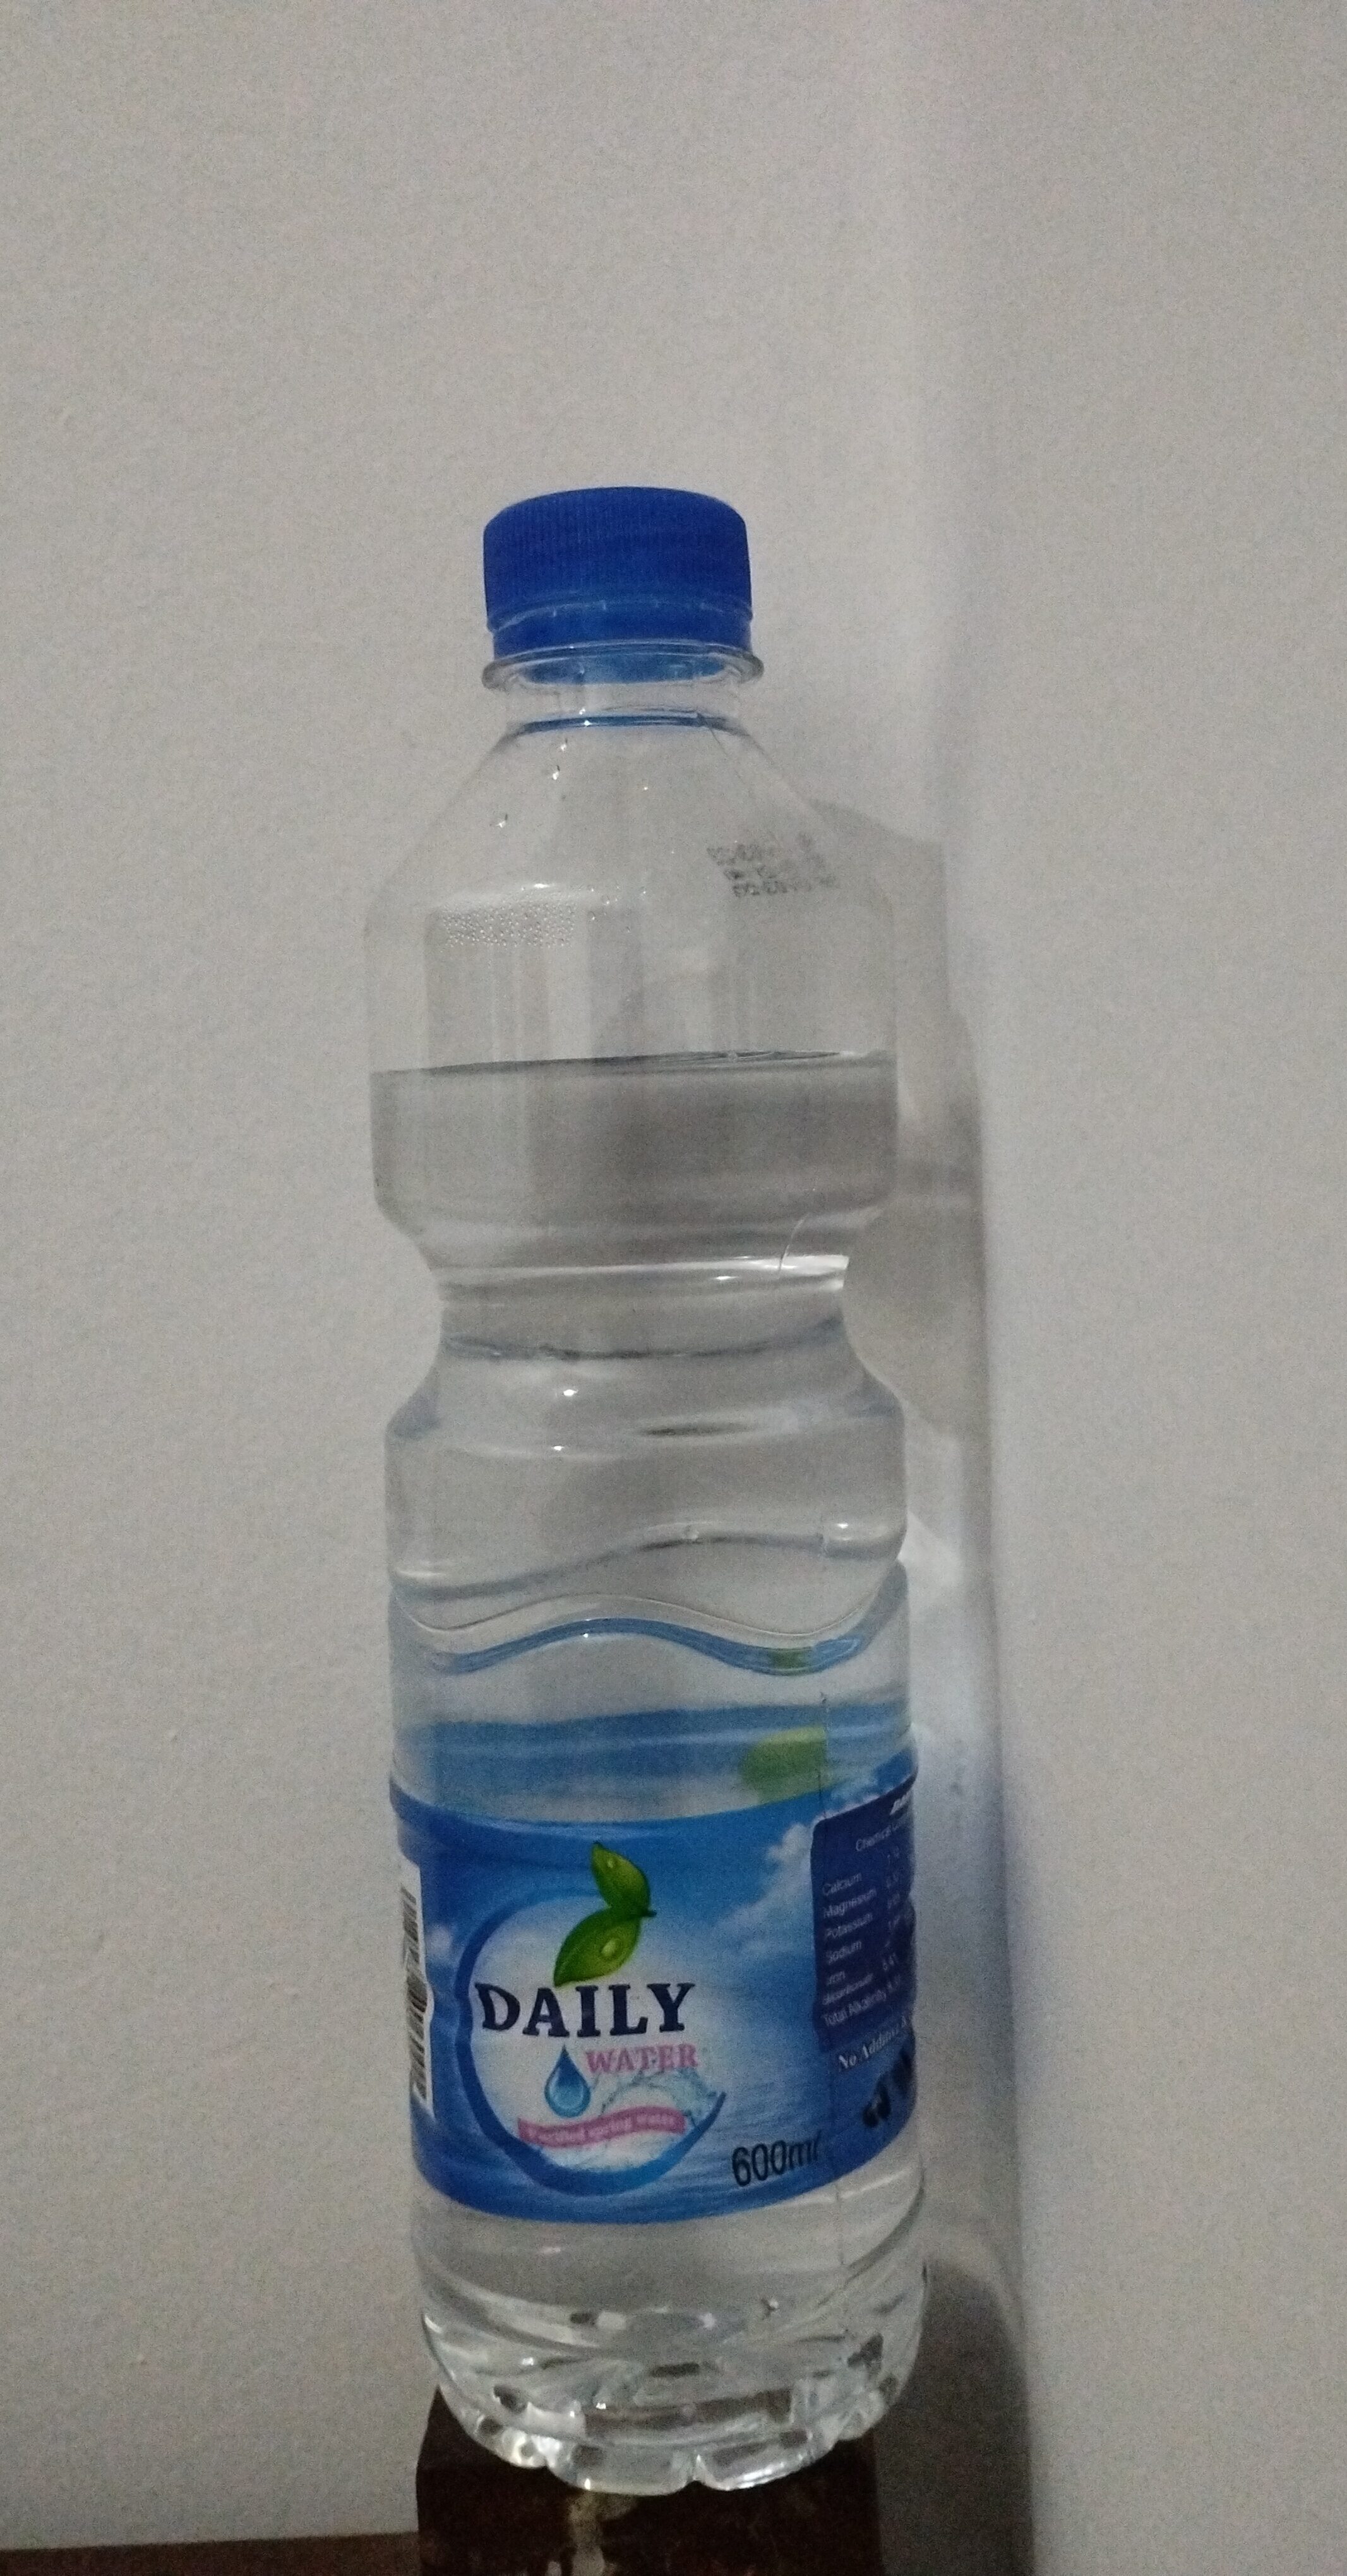 Daily Water - Product - en